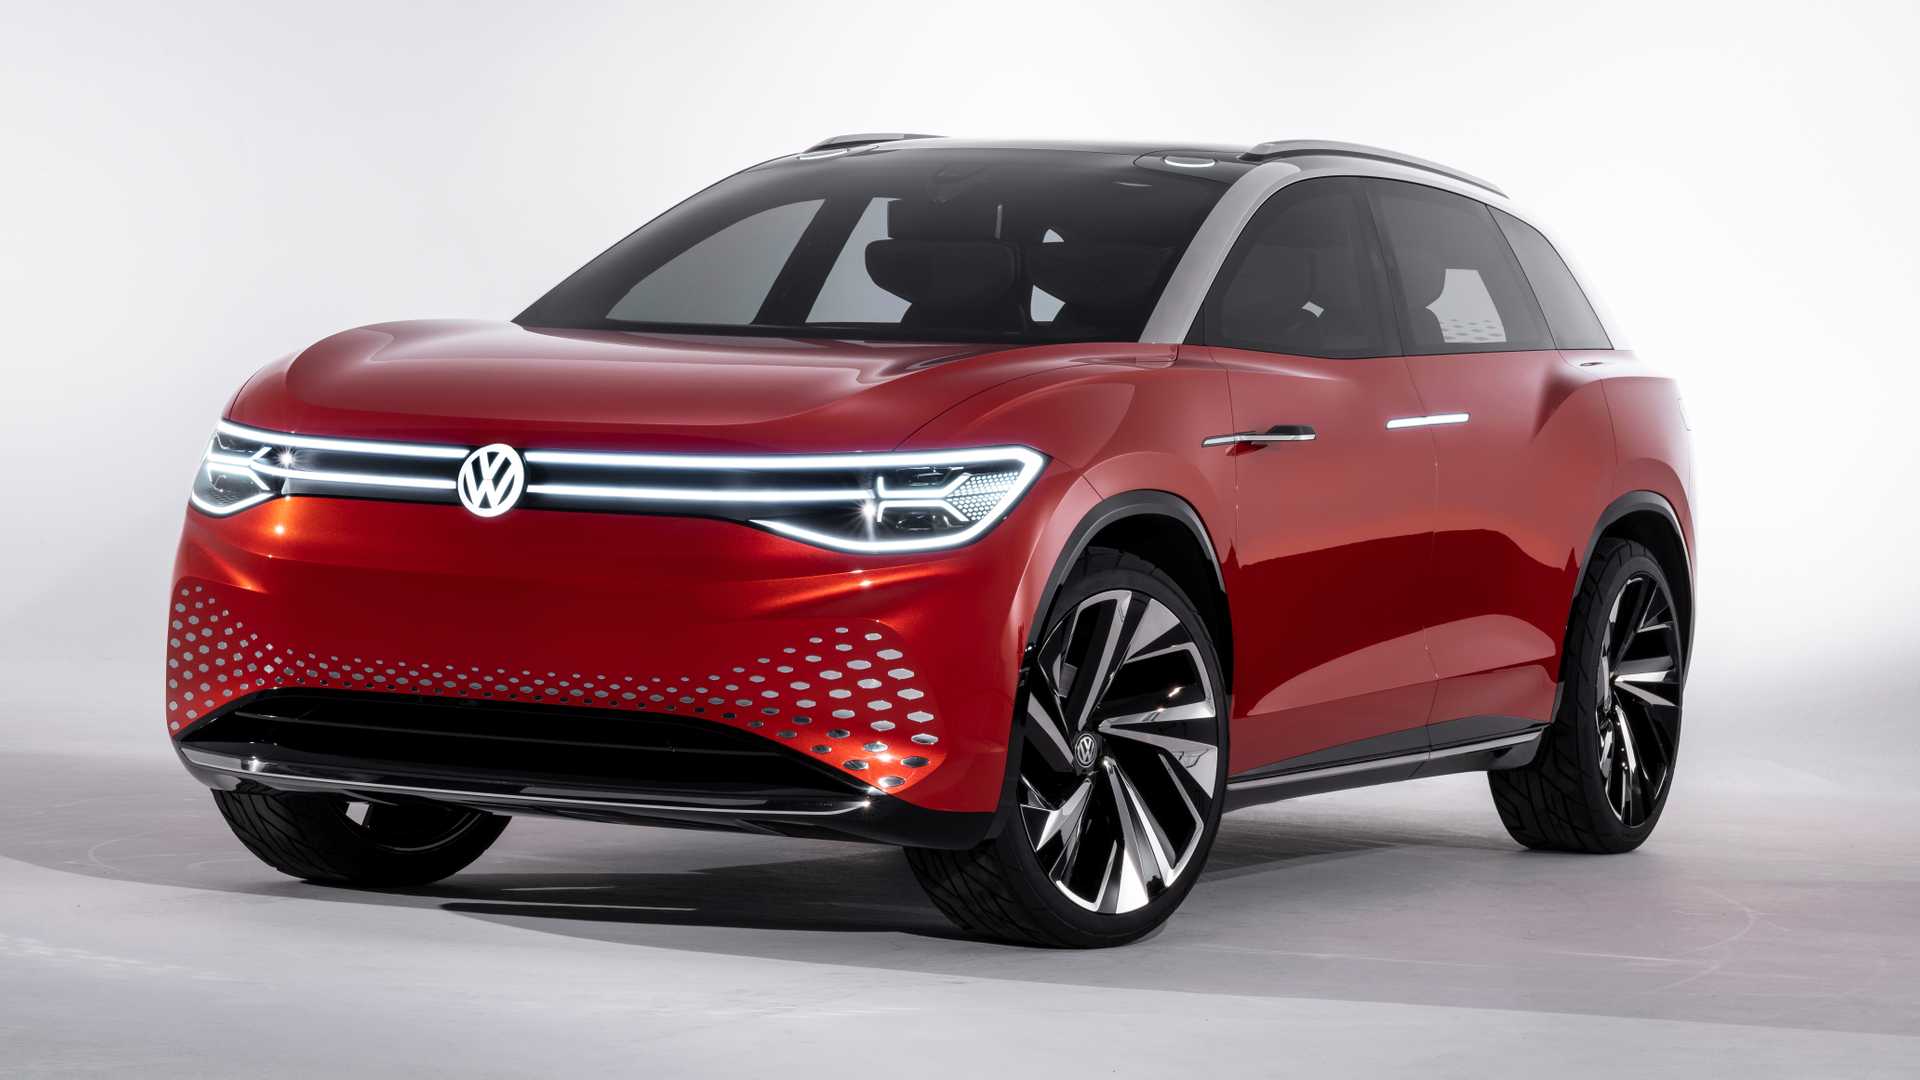 VW I.D. Roomzz Electric SUV Concept Revealed